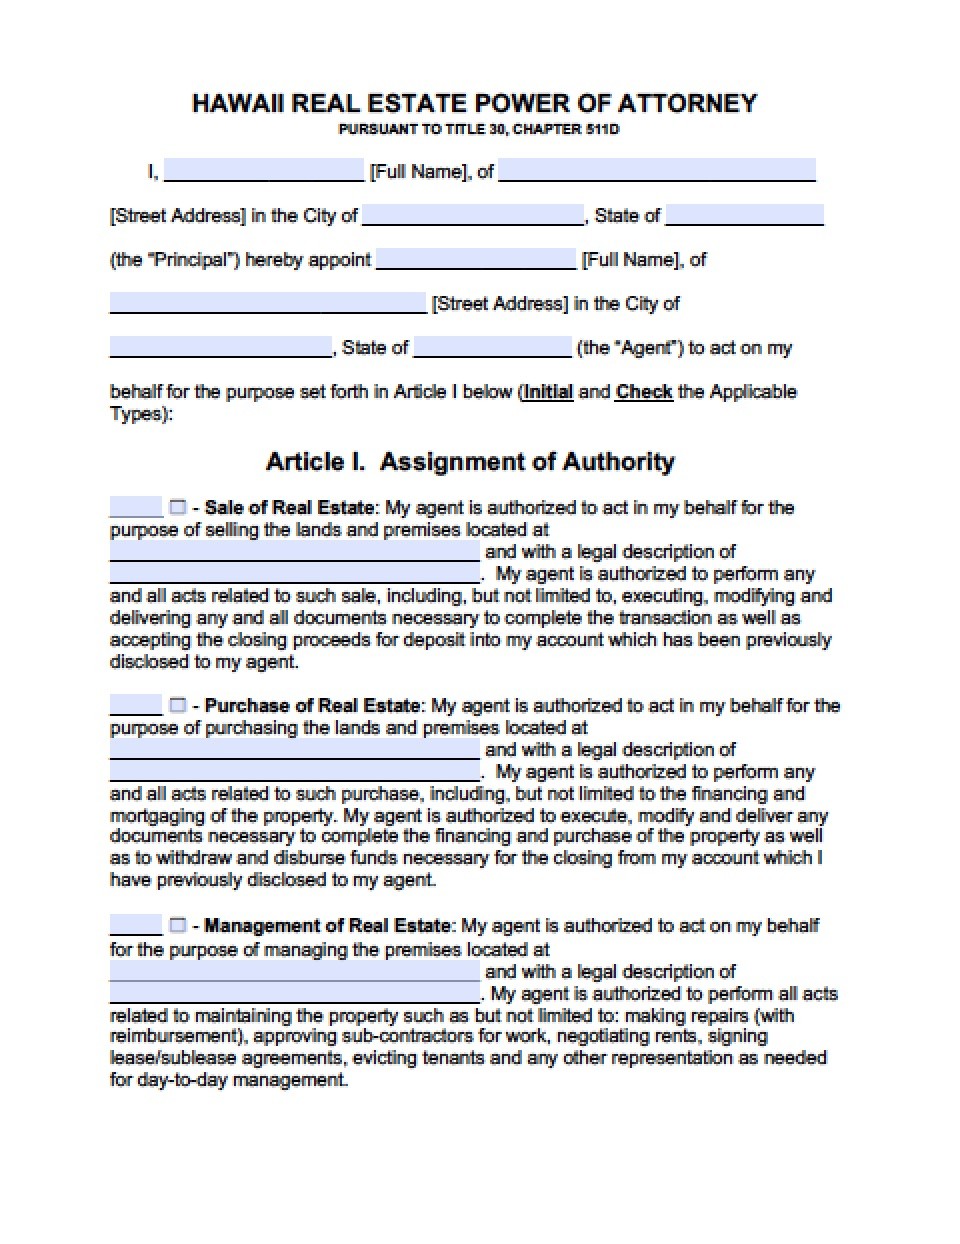 Hawaii Real Estate ONLY Power Of Attorney Form Document